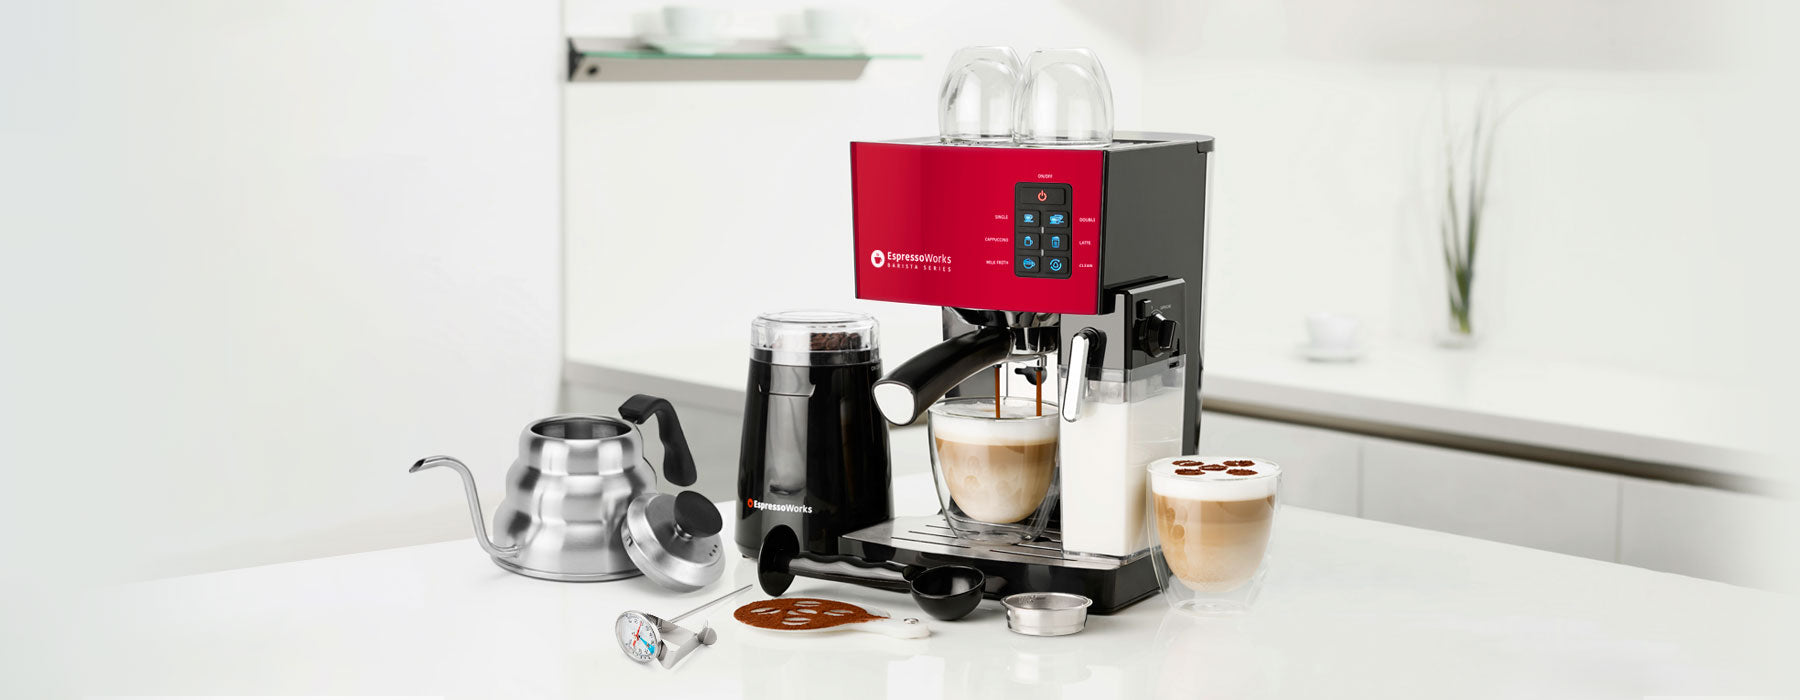 A Beginner’s Guide on How to Become a Home Barista - At home barista essentials, blog by EspressoWorks